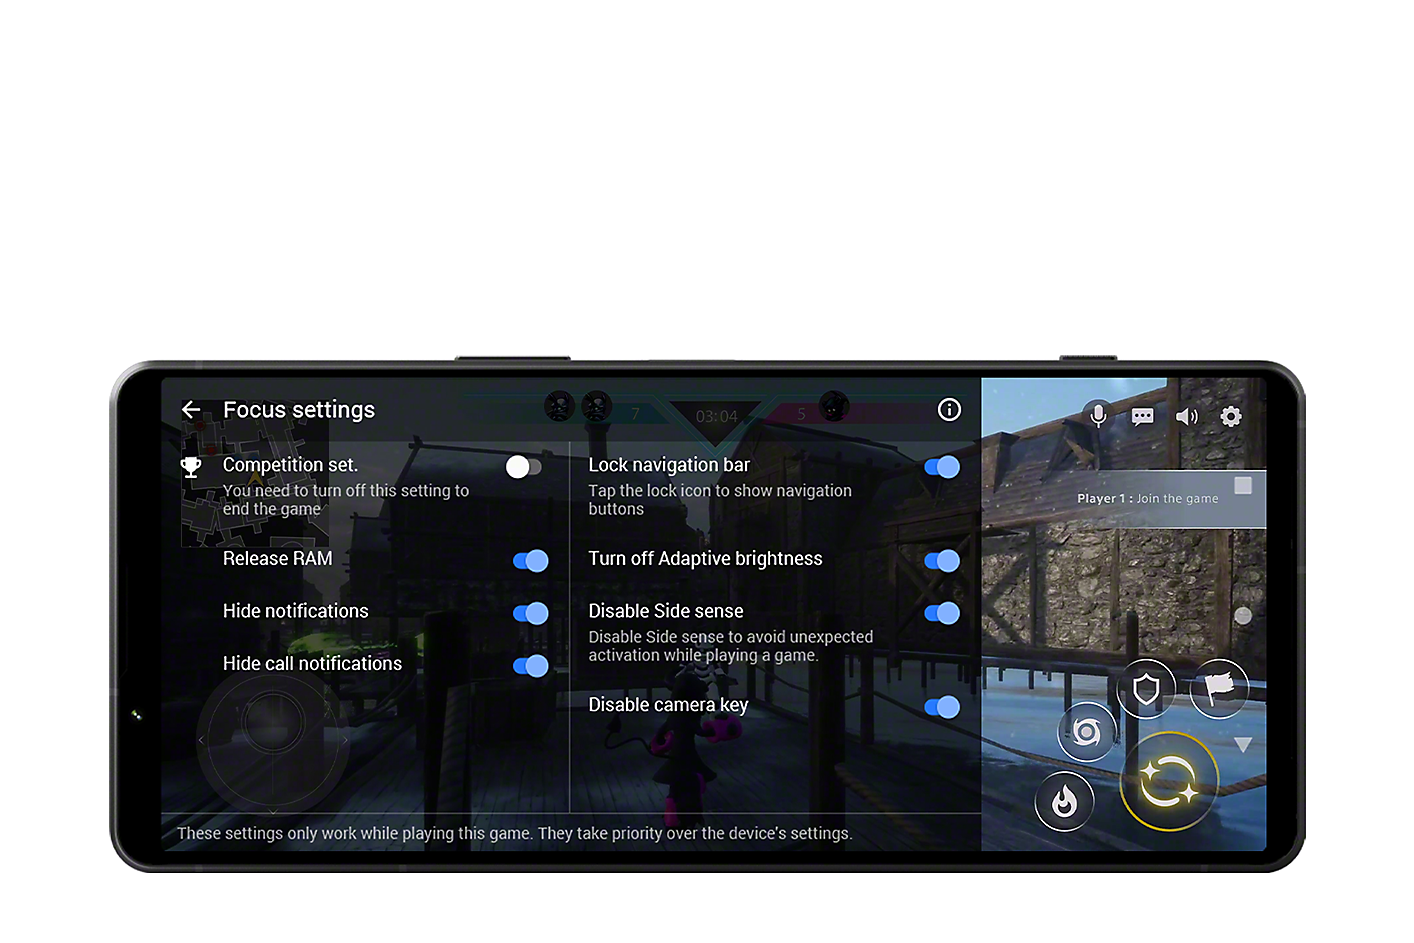 Xperia 1 V showing a gaming screen with the focus settings interface